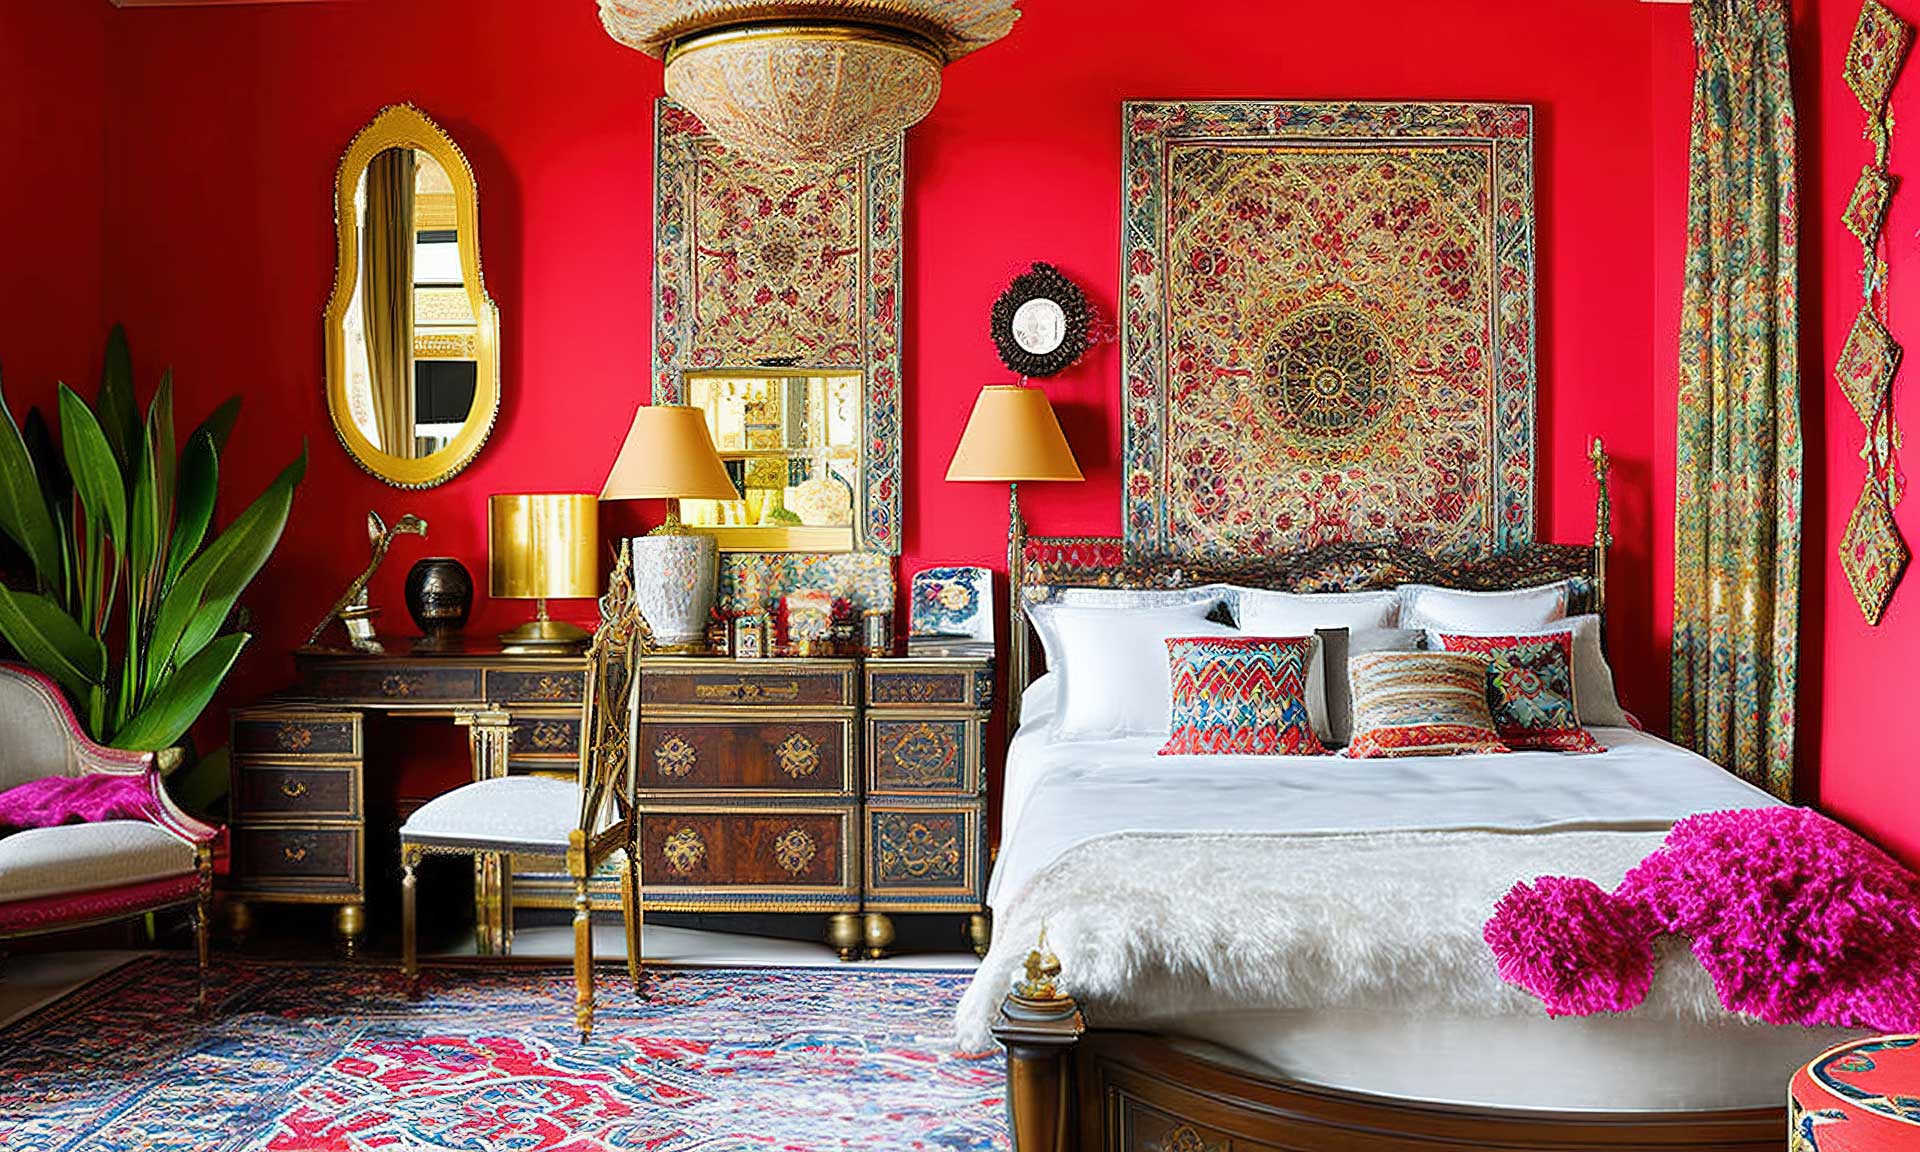 Antique Meets Maximalism In This Colorful Bedroom 1